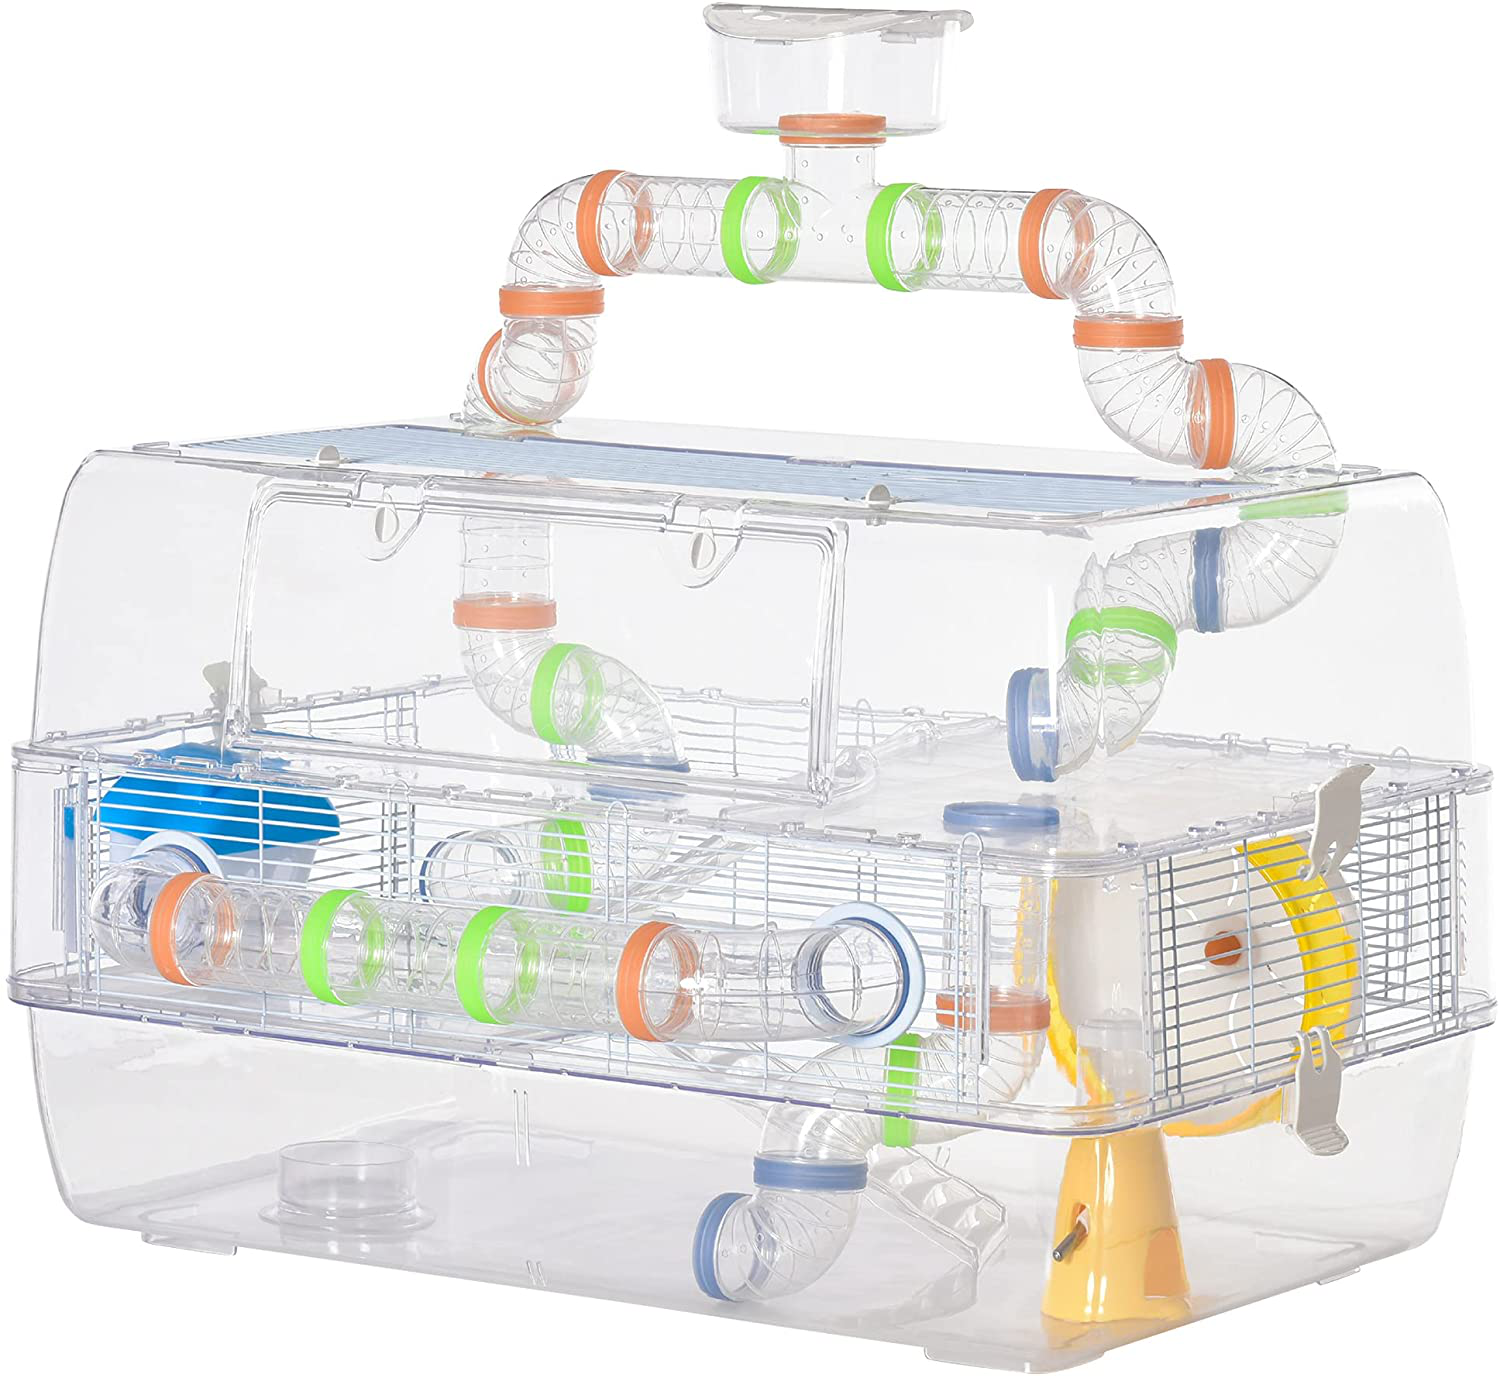 Pawhut Hamster Cage, Small Animal Habitats Rat House Includes Water Bottle, Food Dish, Exercise Wheel, 27.5" L X 18" W X 17.5" H, Transparent